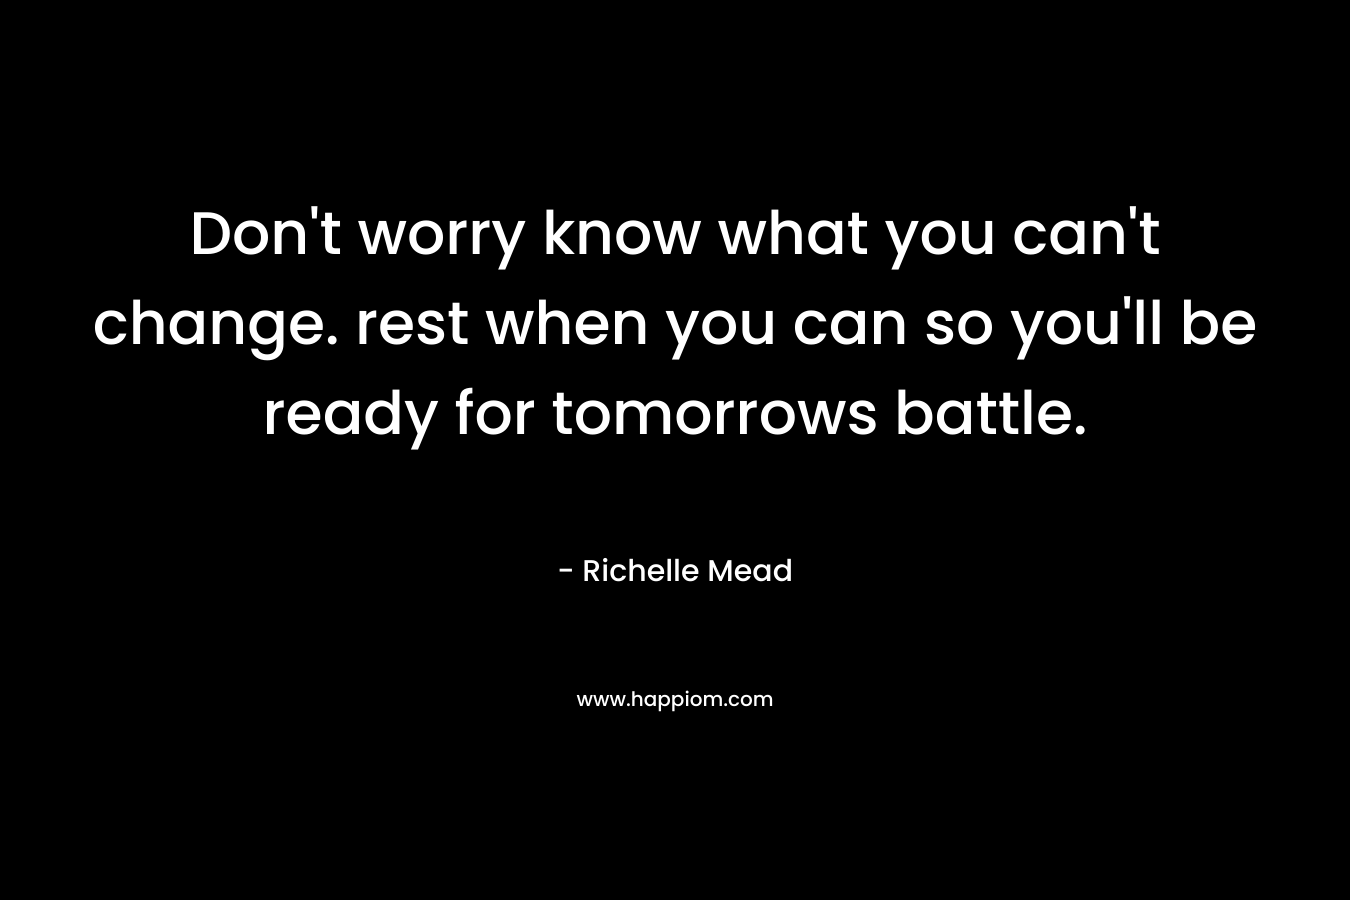 Don’t worry know what you can’t change. rest when you can so you’ll be ready for tomorrows battle. – Richelle Mead